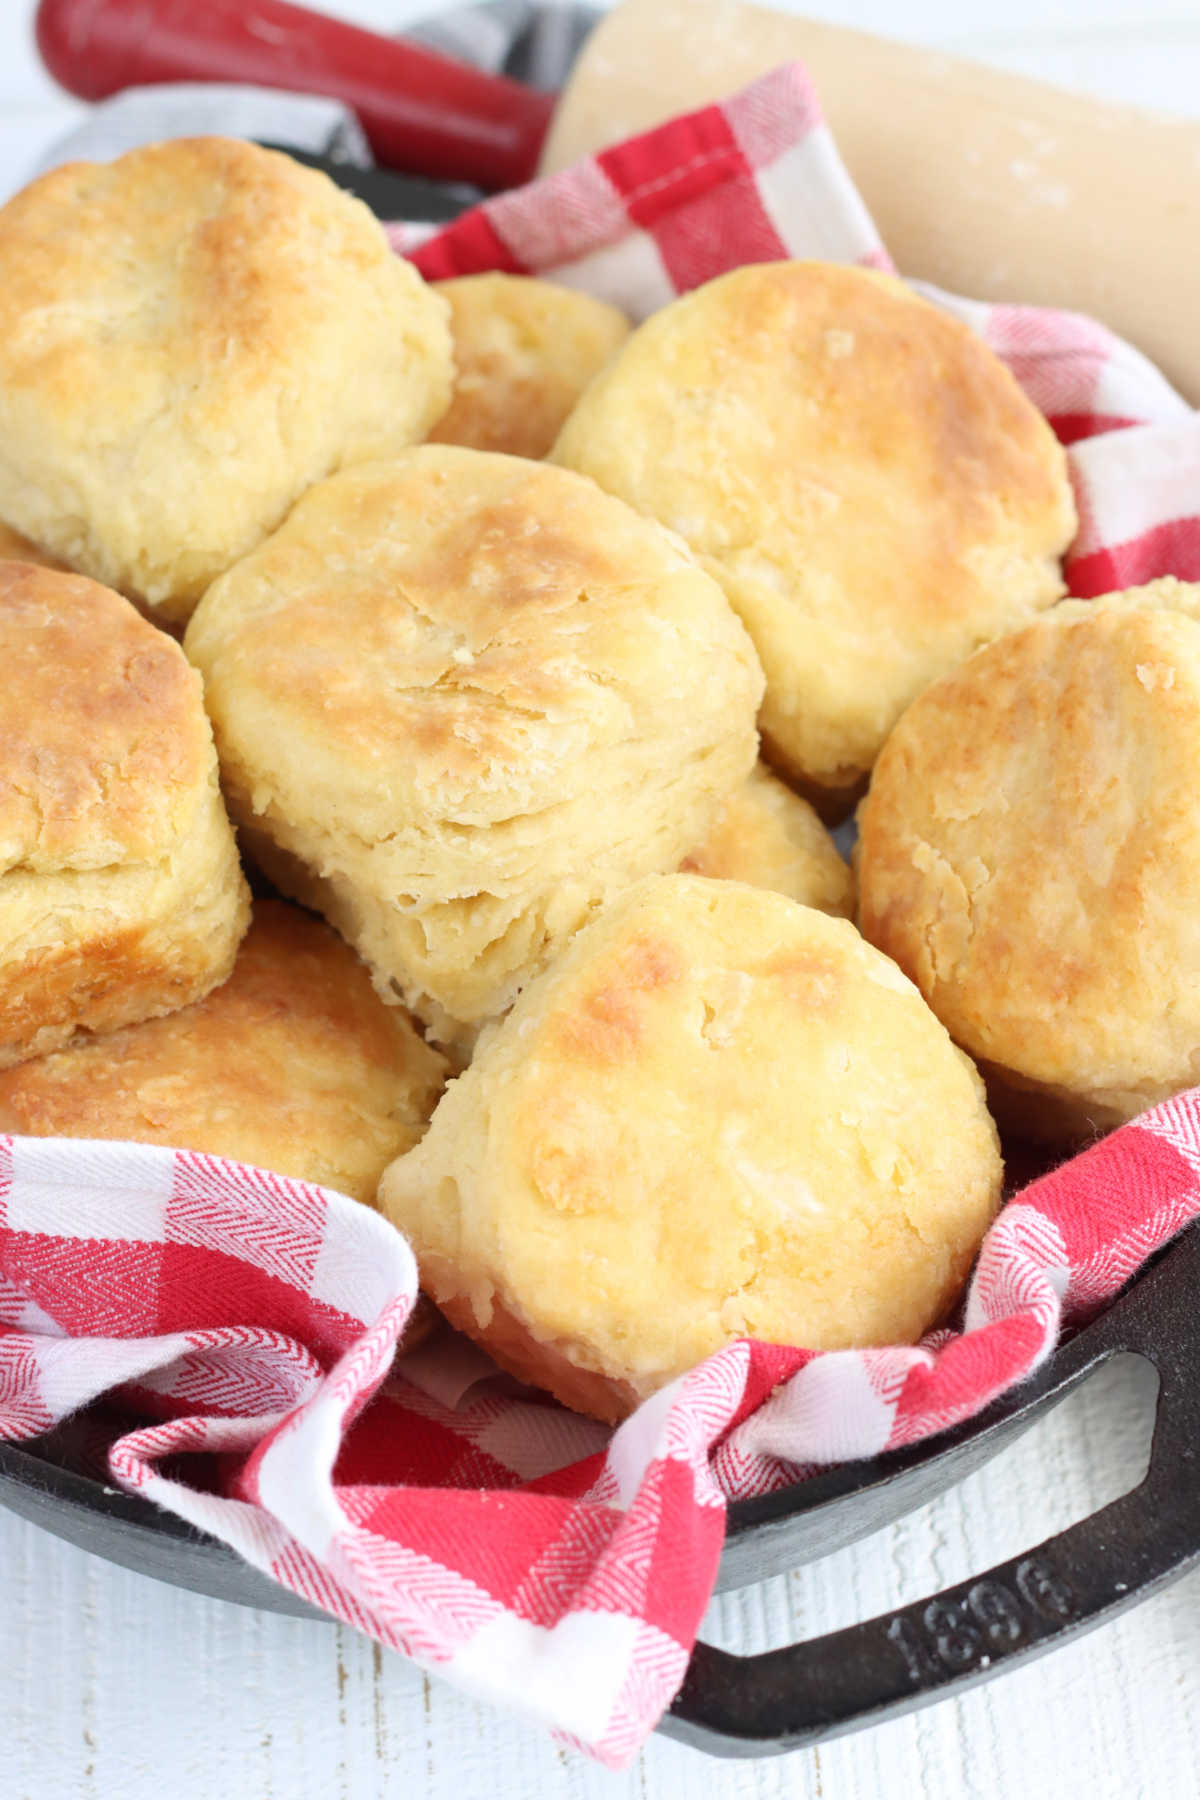 Biscuits in cast iron skillet with red and white checkered kitchen towel.